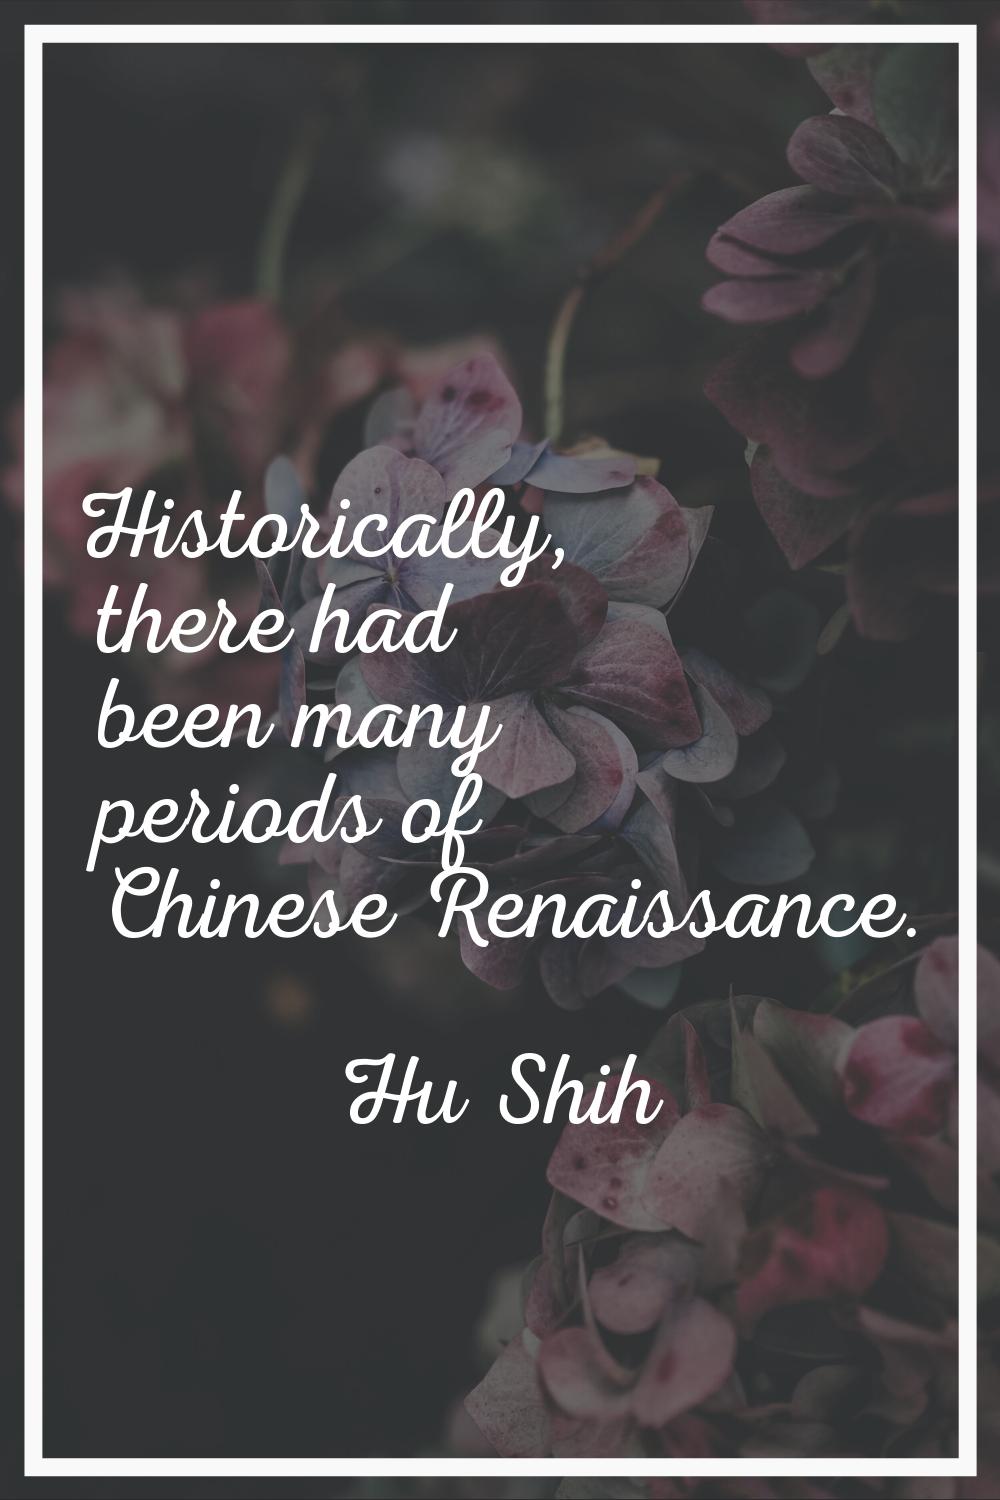 Historically, there had been many periods of Chinese Renaissance.